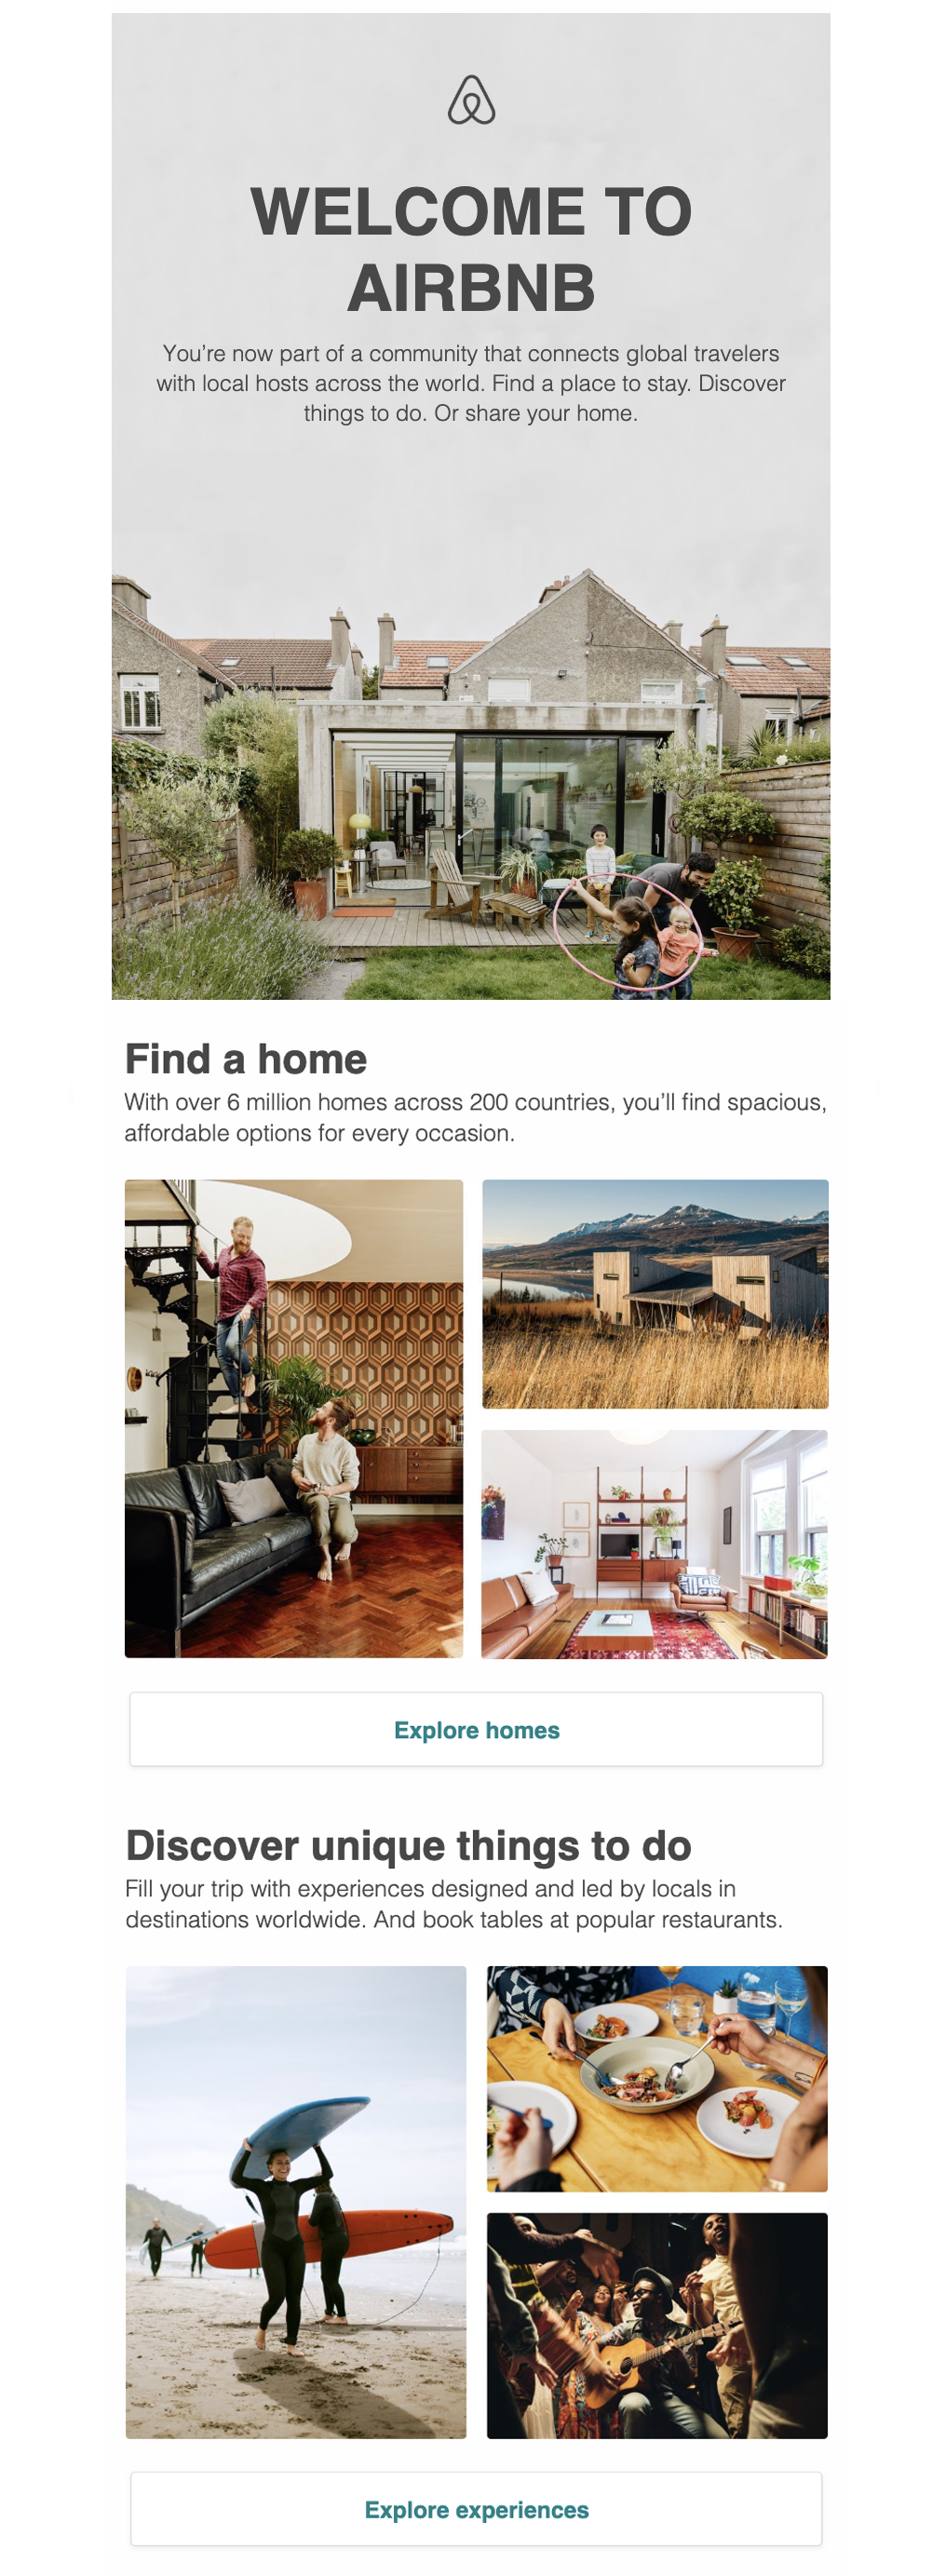 Welcome email - a good example from Airbnb